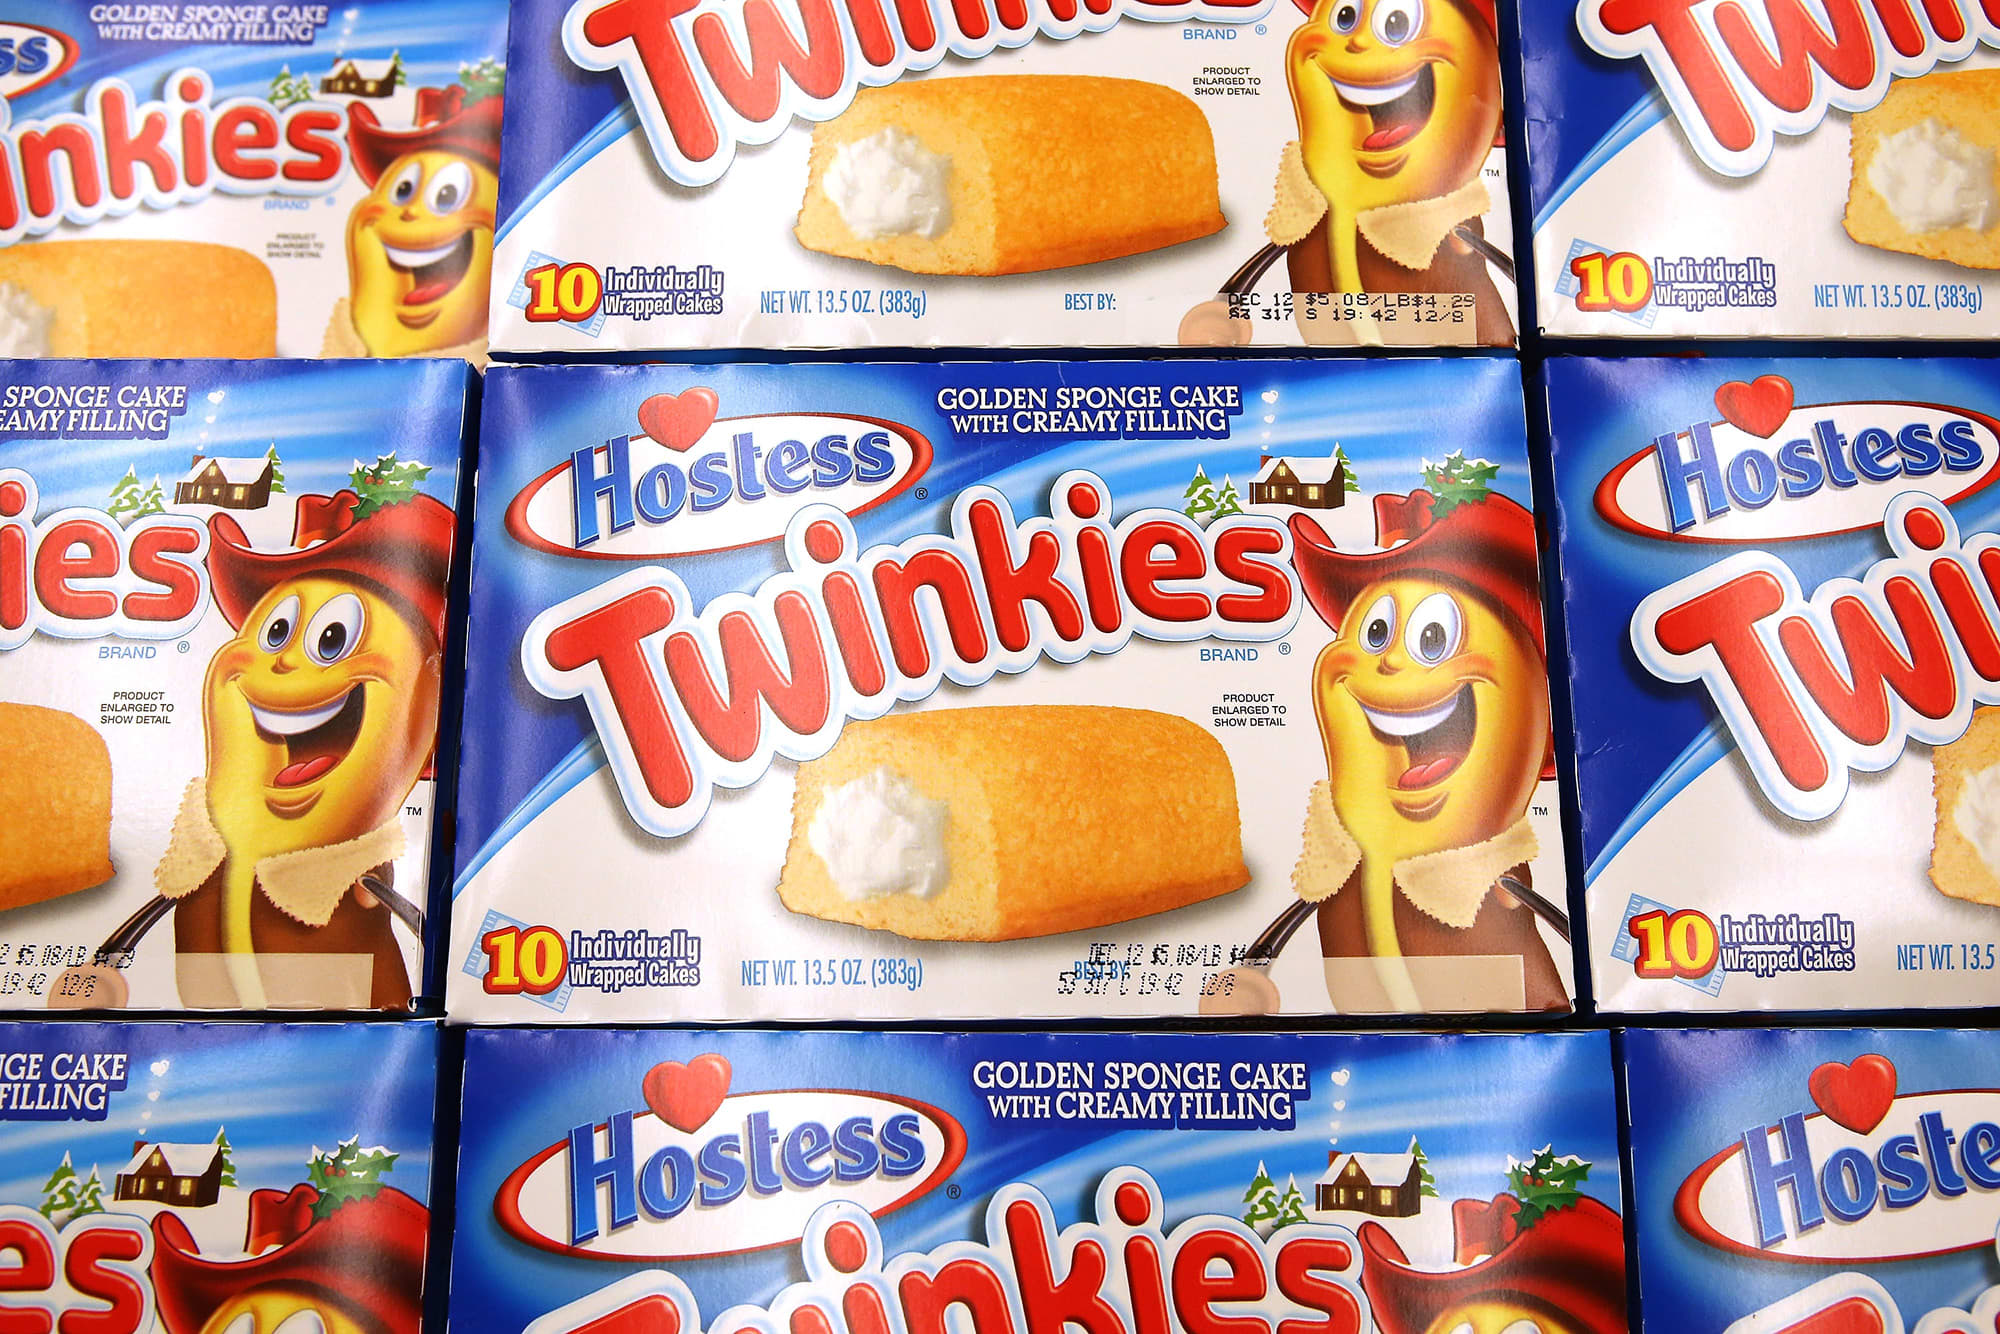 Squeezing Twinkie profits: The case of the shrinking treat